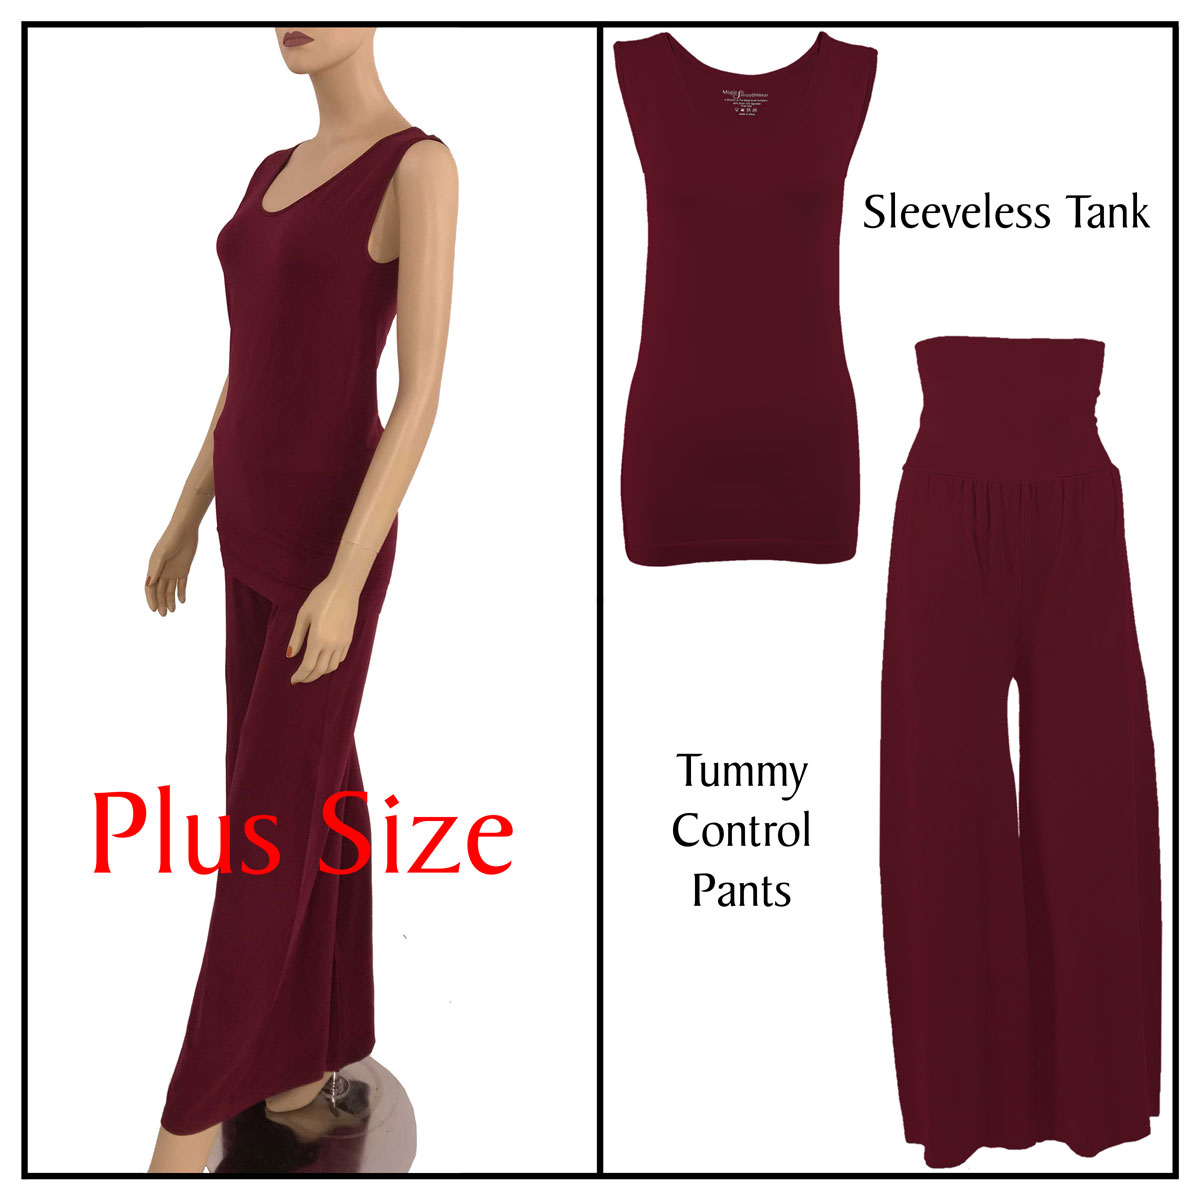 Cabernet Sleeveless Top (Plus Size) with Pants